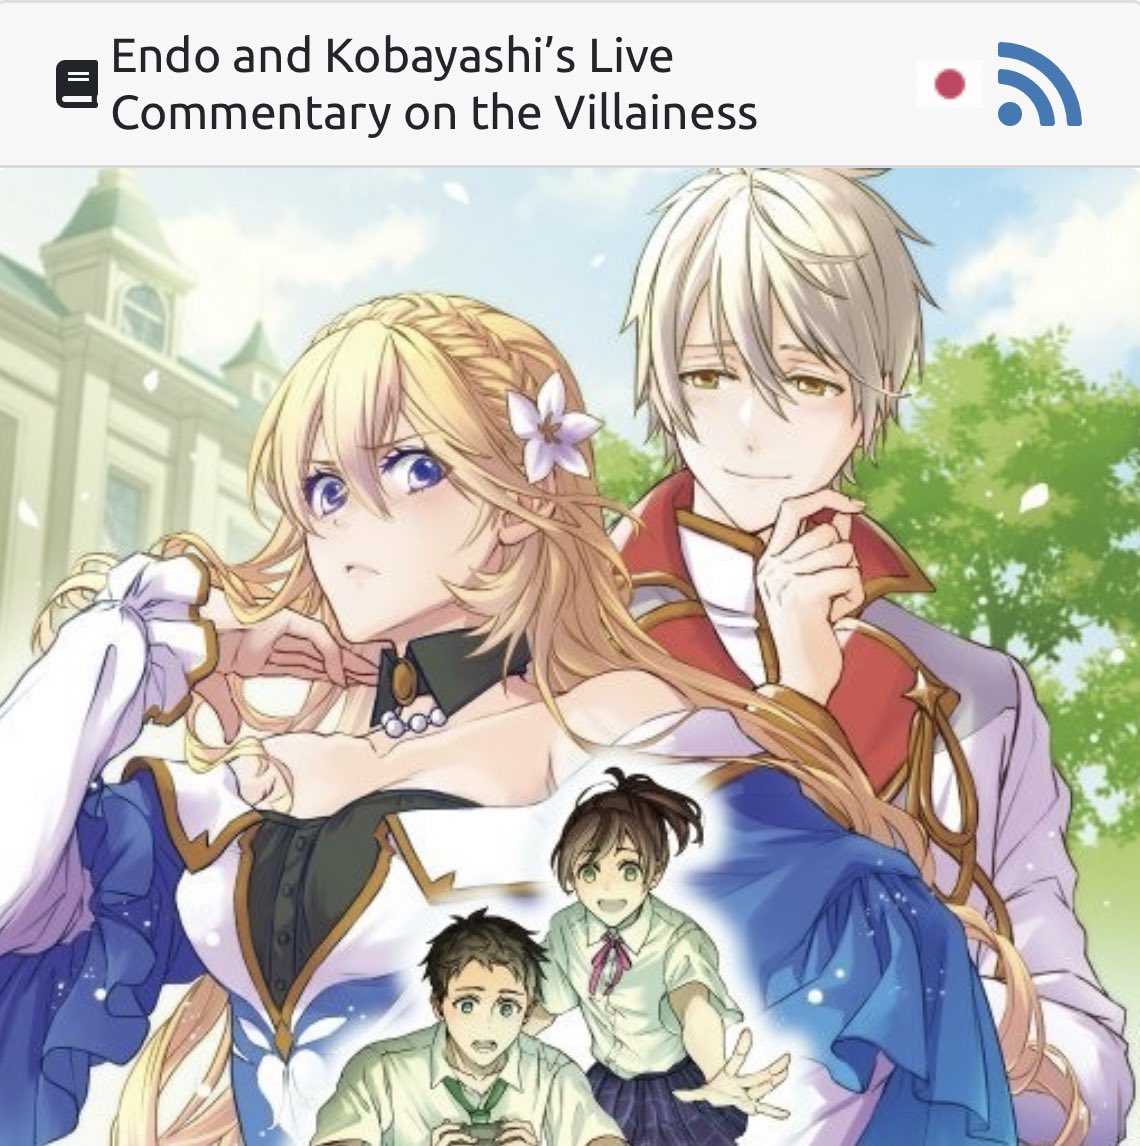 Two classmates Endo & Kobayashi playing an otome game together and their commentary is heard by Prince Seig, one of the romance targets, so the two ‘gods’ guided him to understand his tsundere fiancee, a villainess who will fall into ruin if she was not reached out to properly.